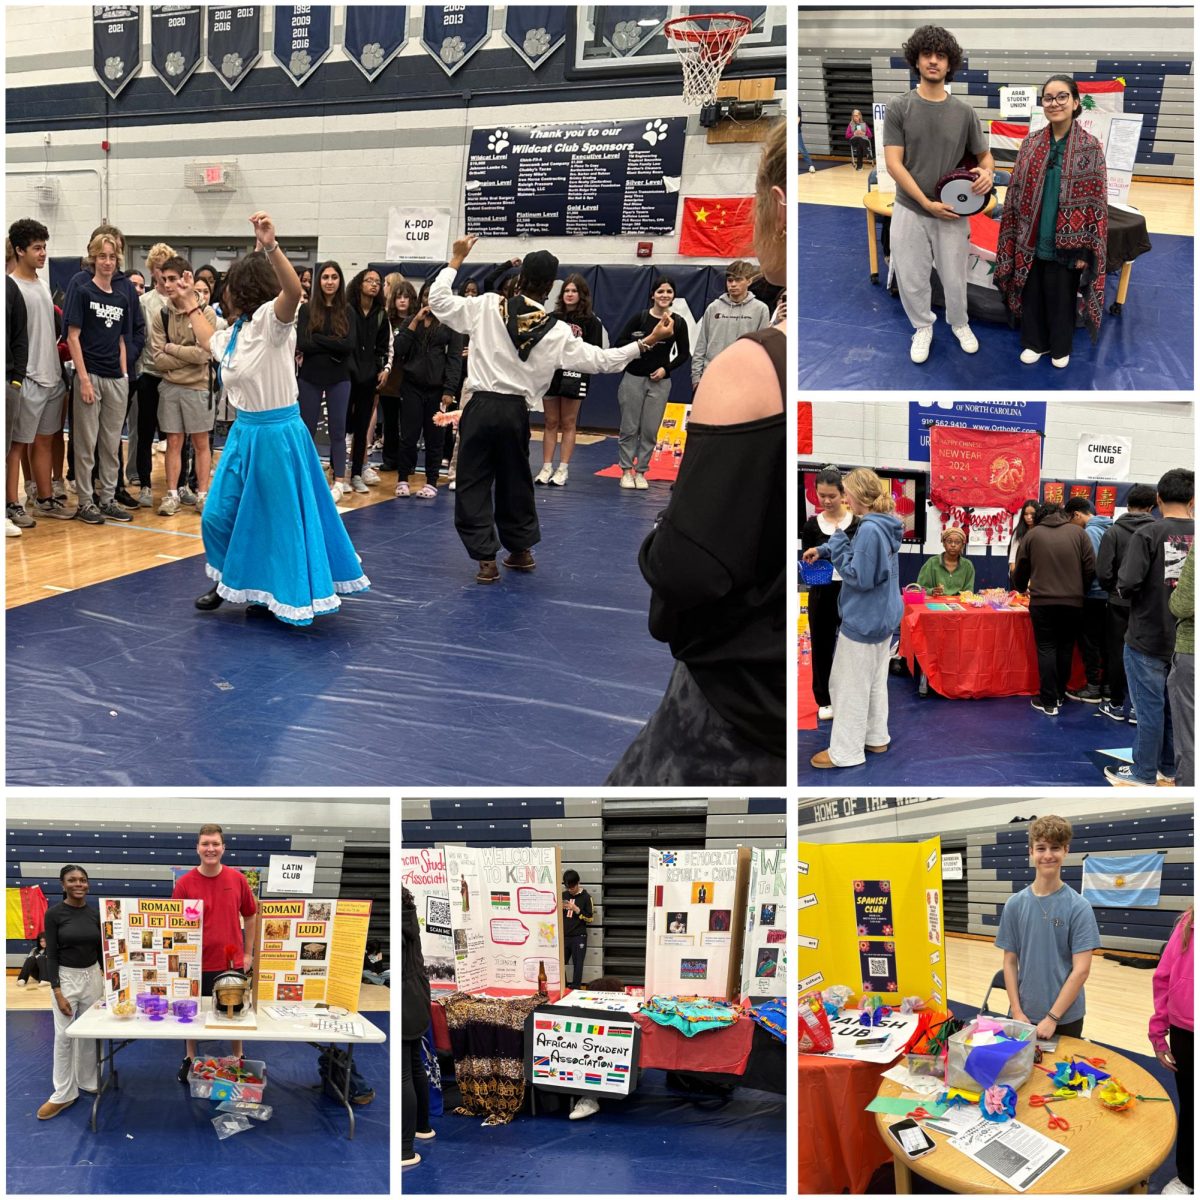 The annual International Fair was held at Millbrook. This fair helps students show their cultures, and for others to learn more about them. 